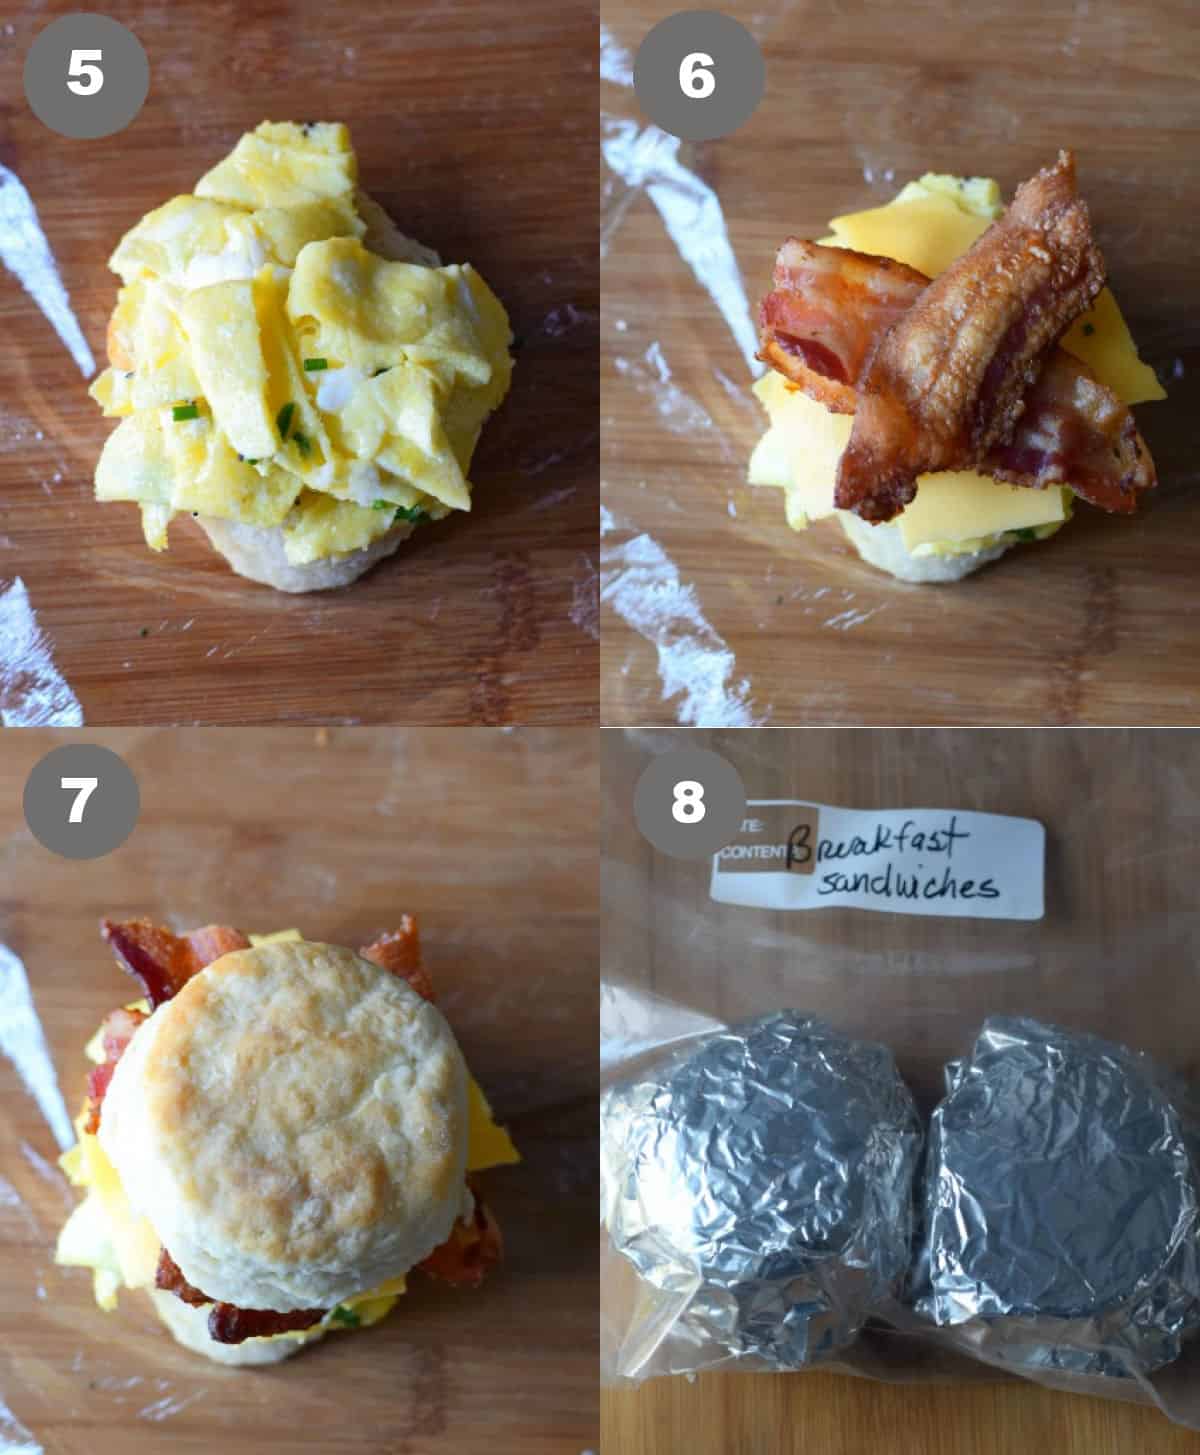 Scrambled eggs placed on a biscuit with cooked bacon and wrapped in foil and ready for the freezer.